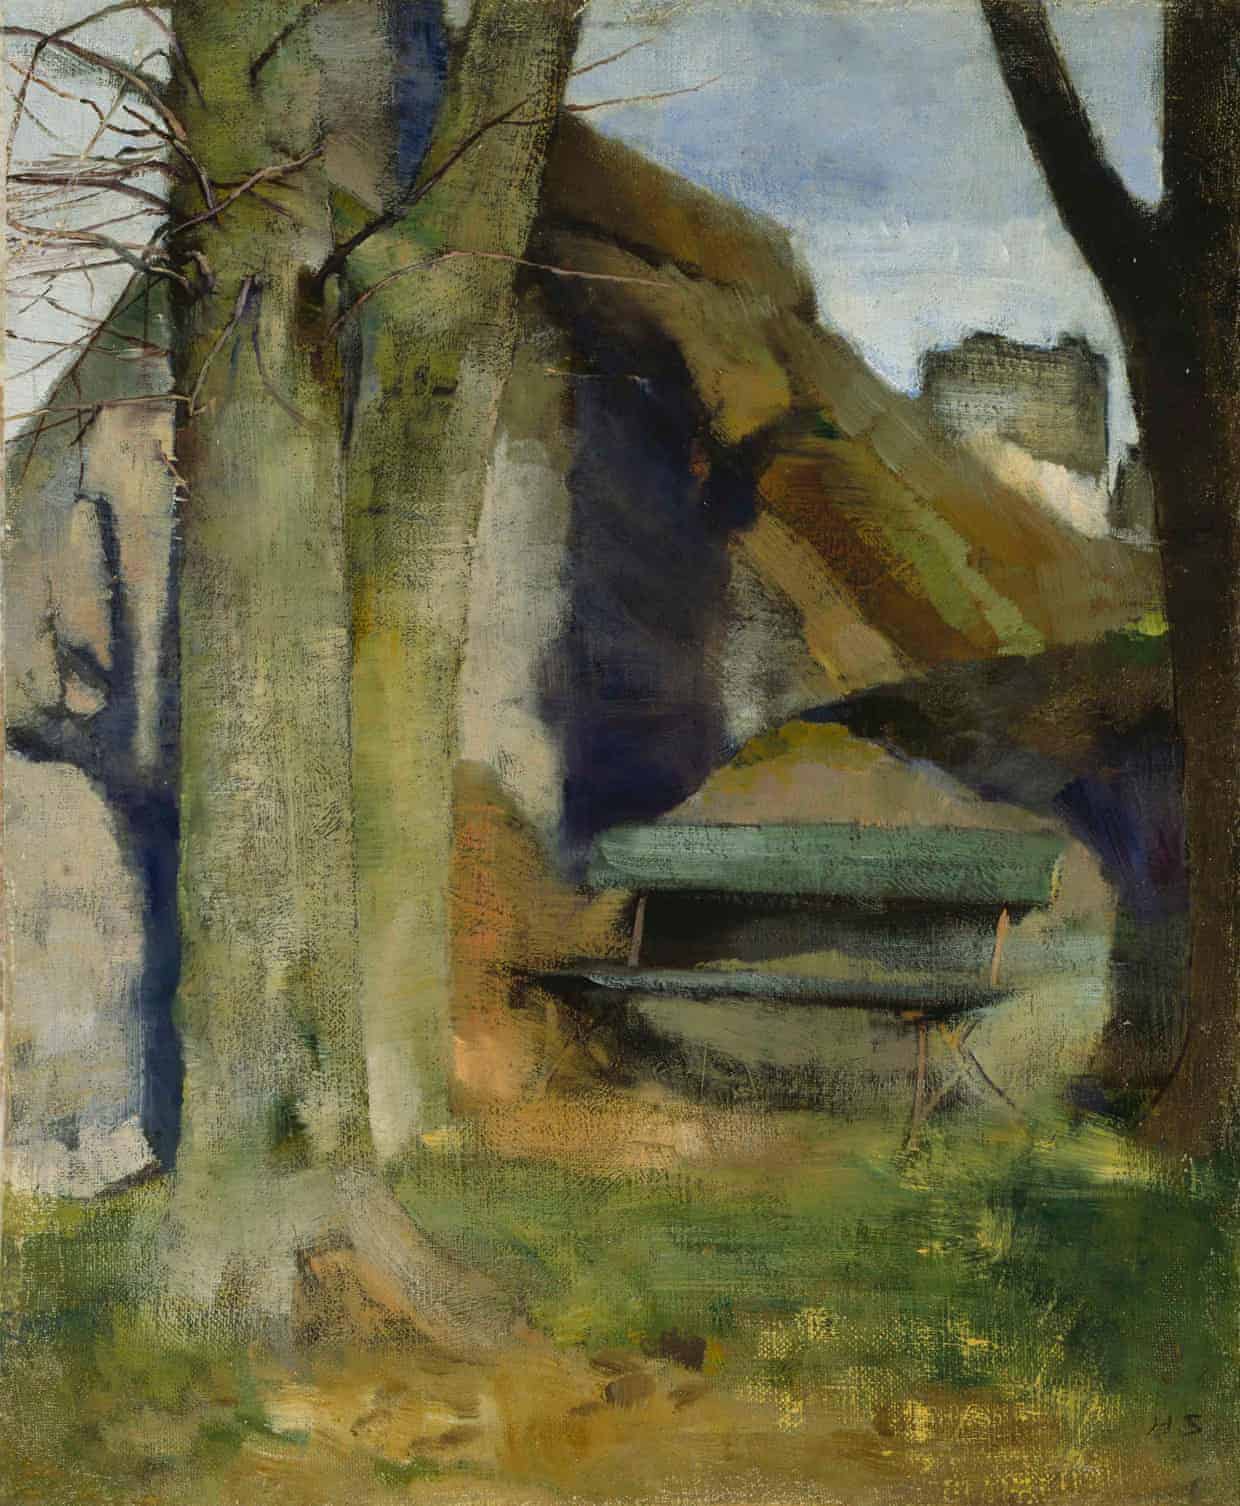 Helene Schjerfbeck, Shadow on the Wall (Breton Landscape), 1883. Photograph: Niemistö Collection; photo: Finnish National Gallery